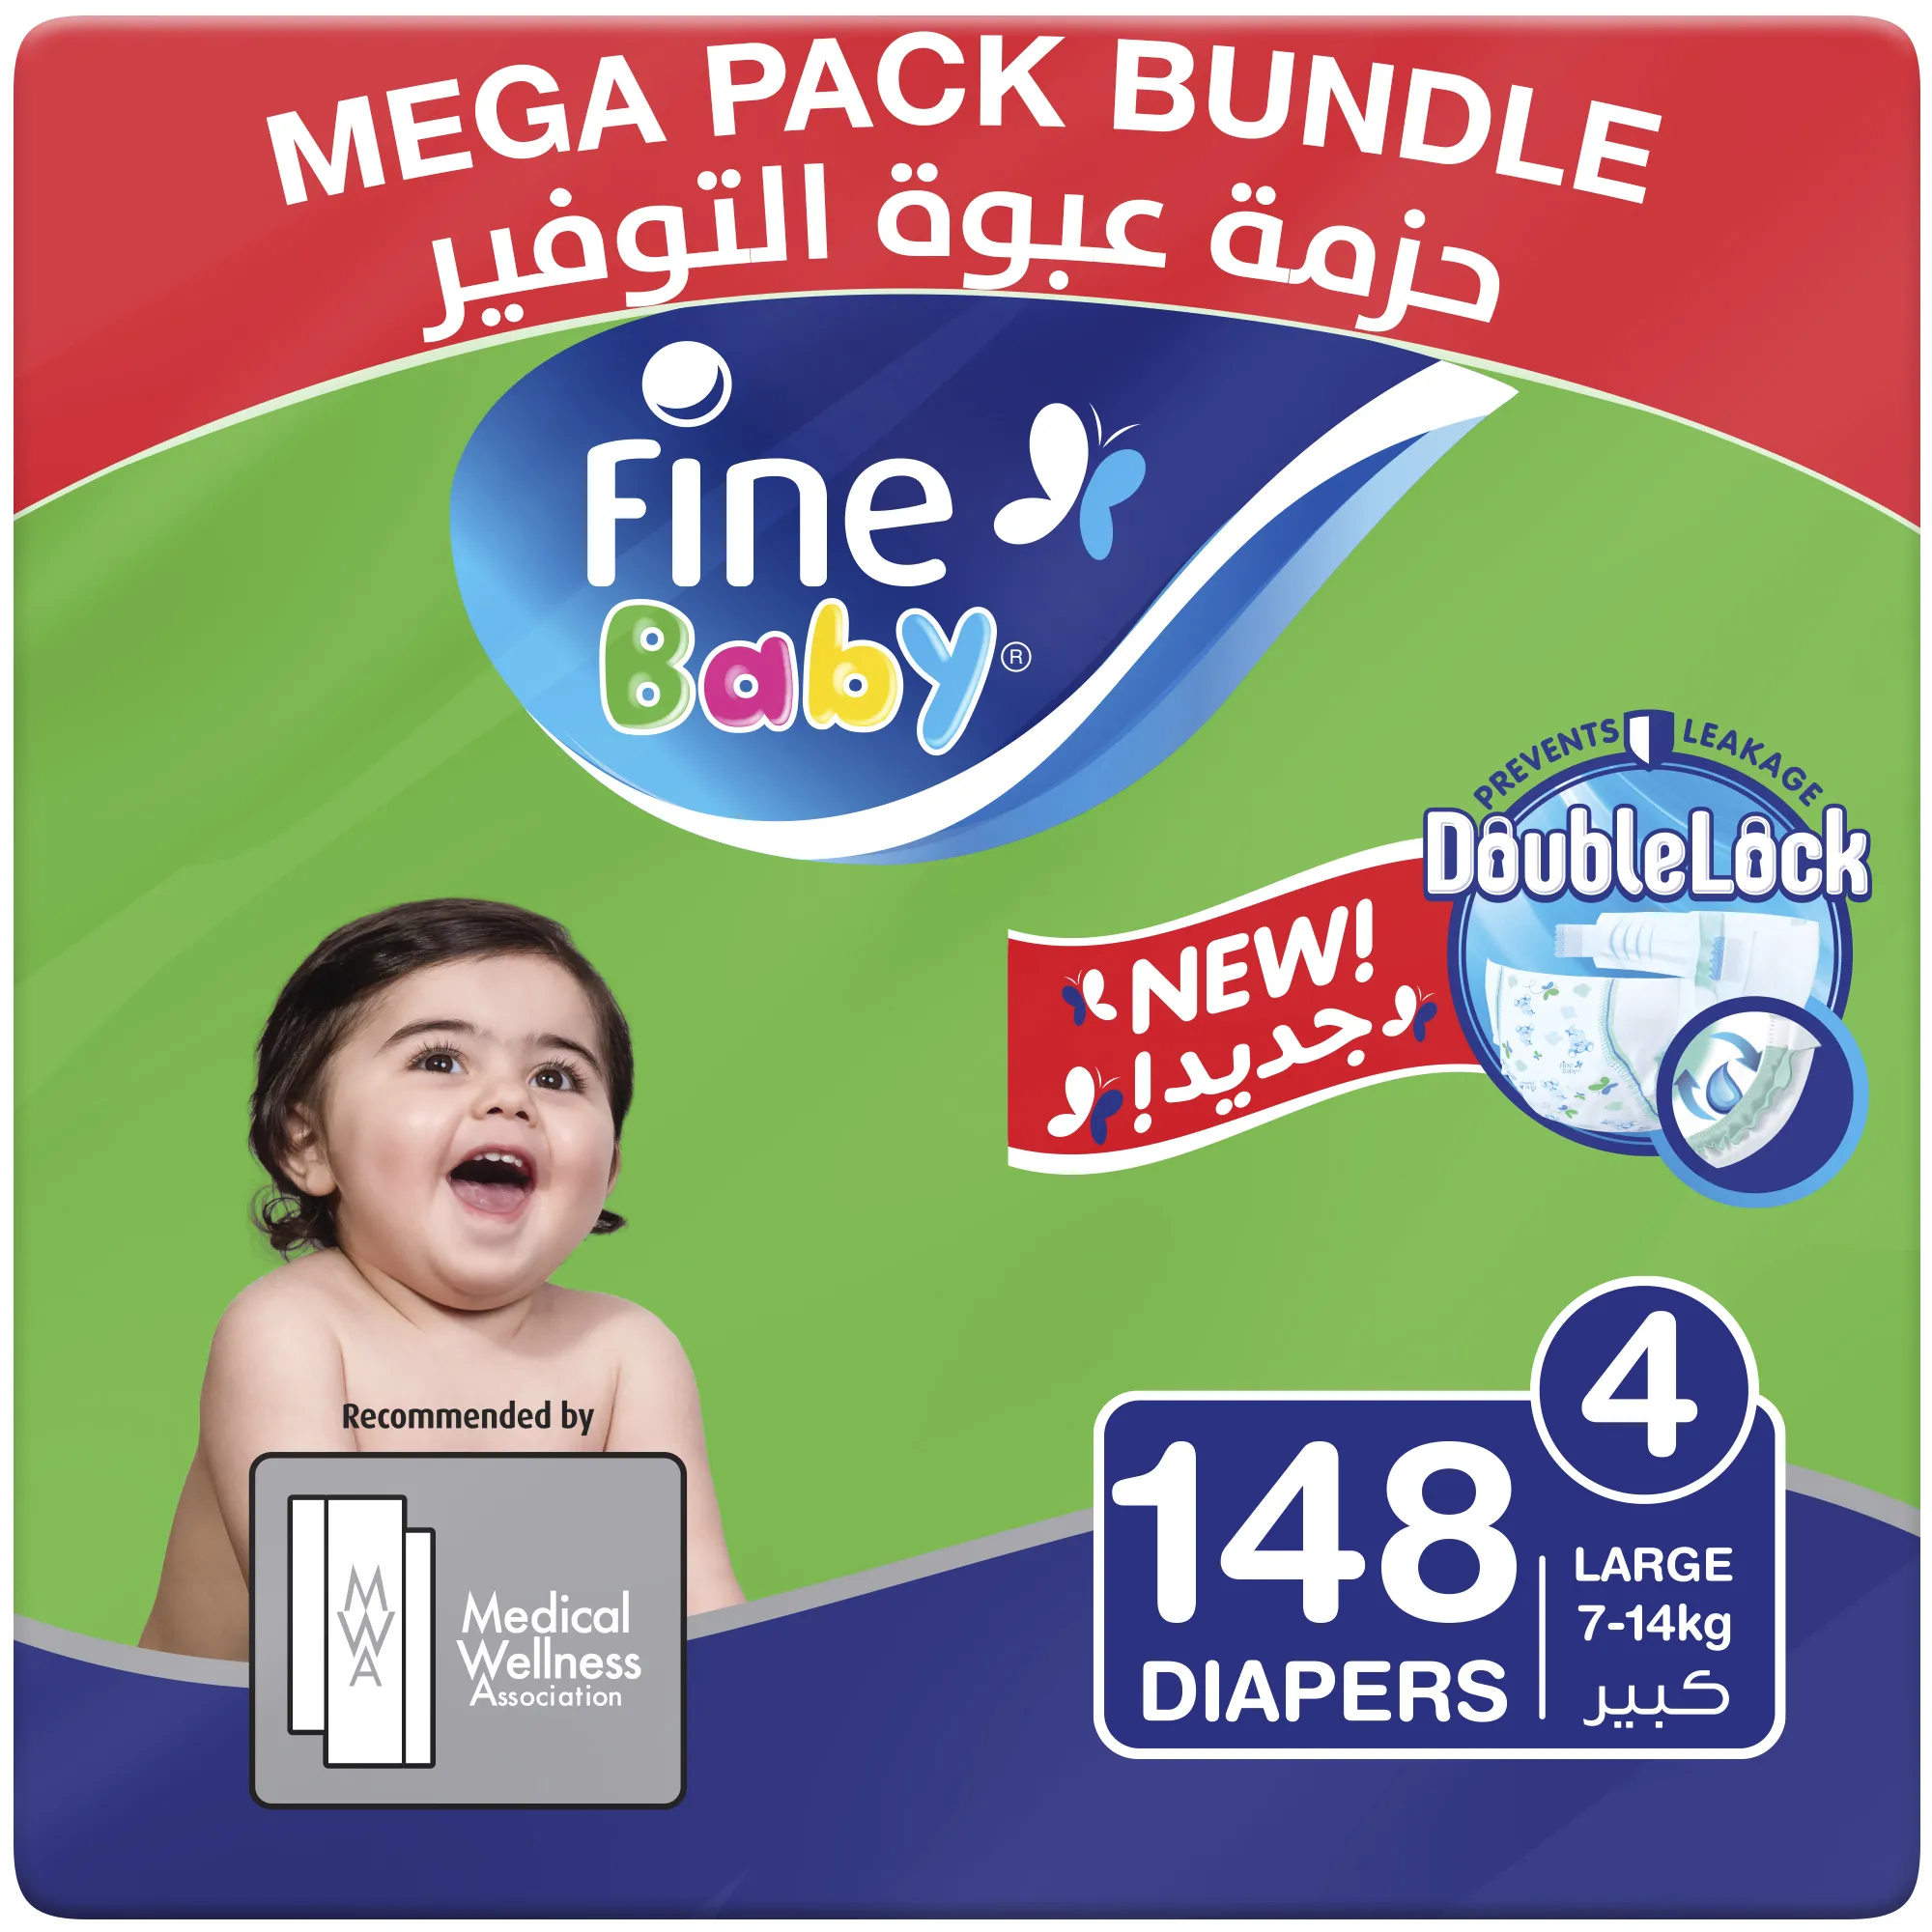 Fine Baby Diapers, Size 4, Large 7 14kg, Mega Pack, 2 packs of 74 diapers, 148 total count